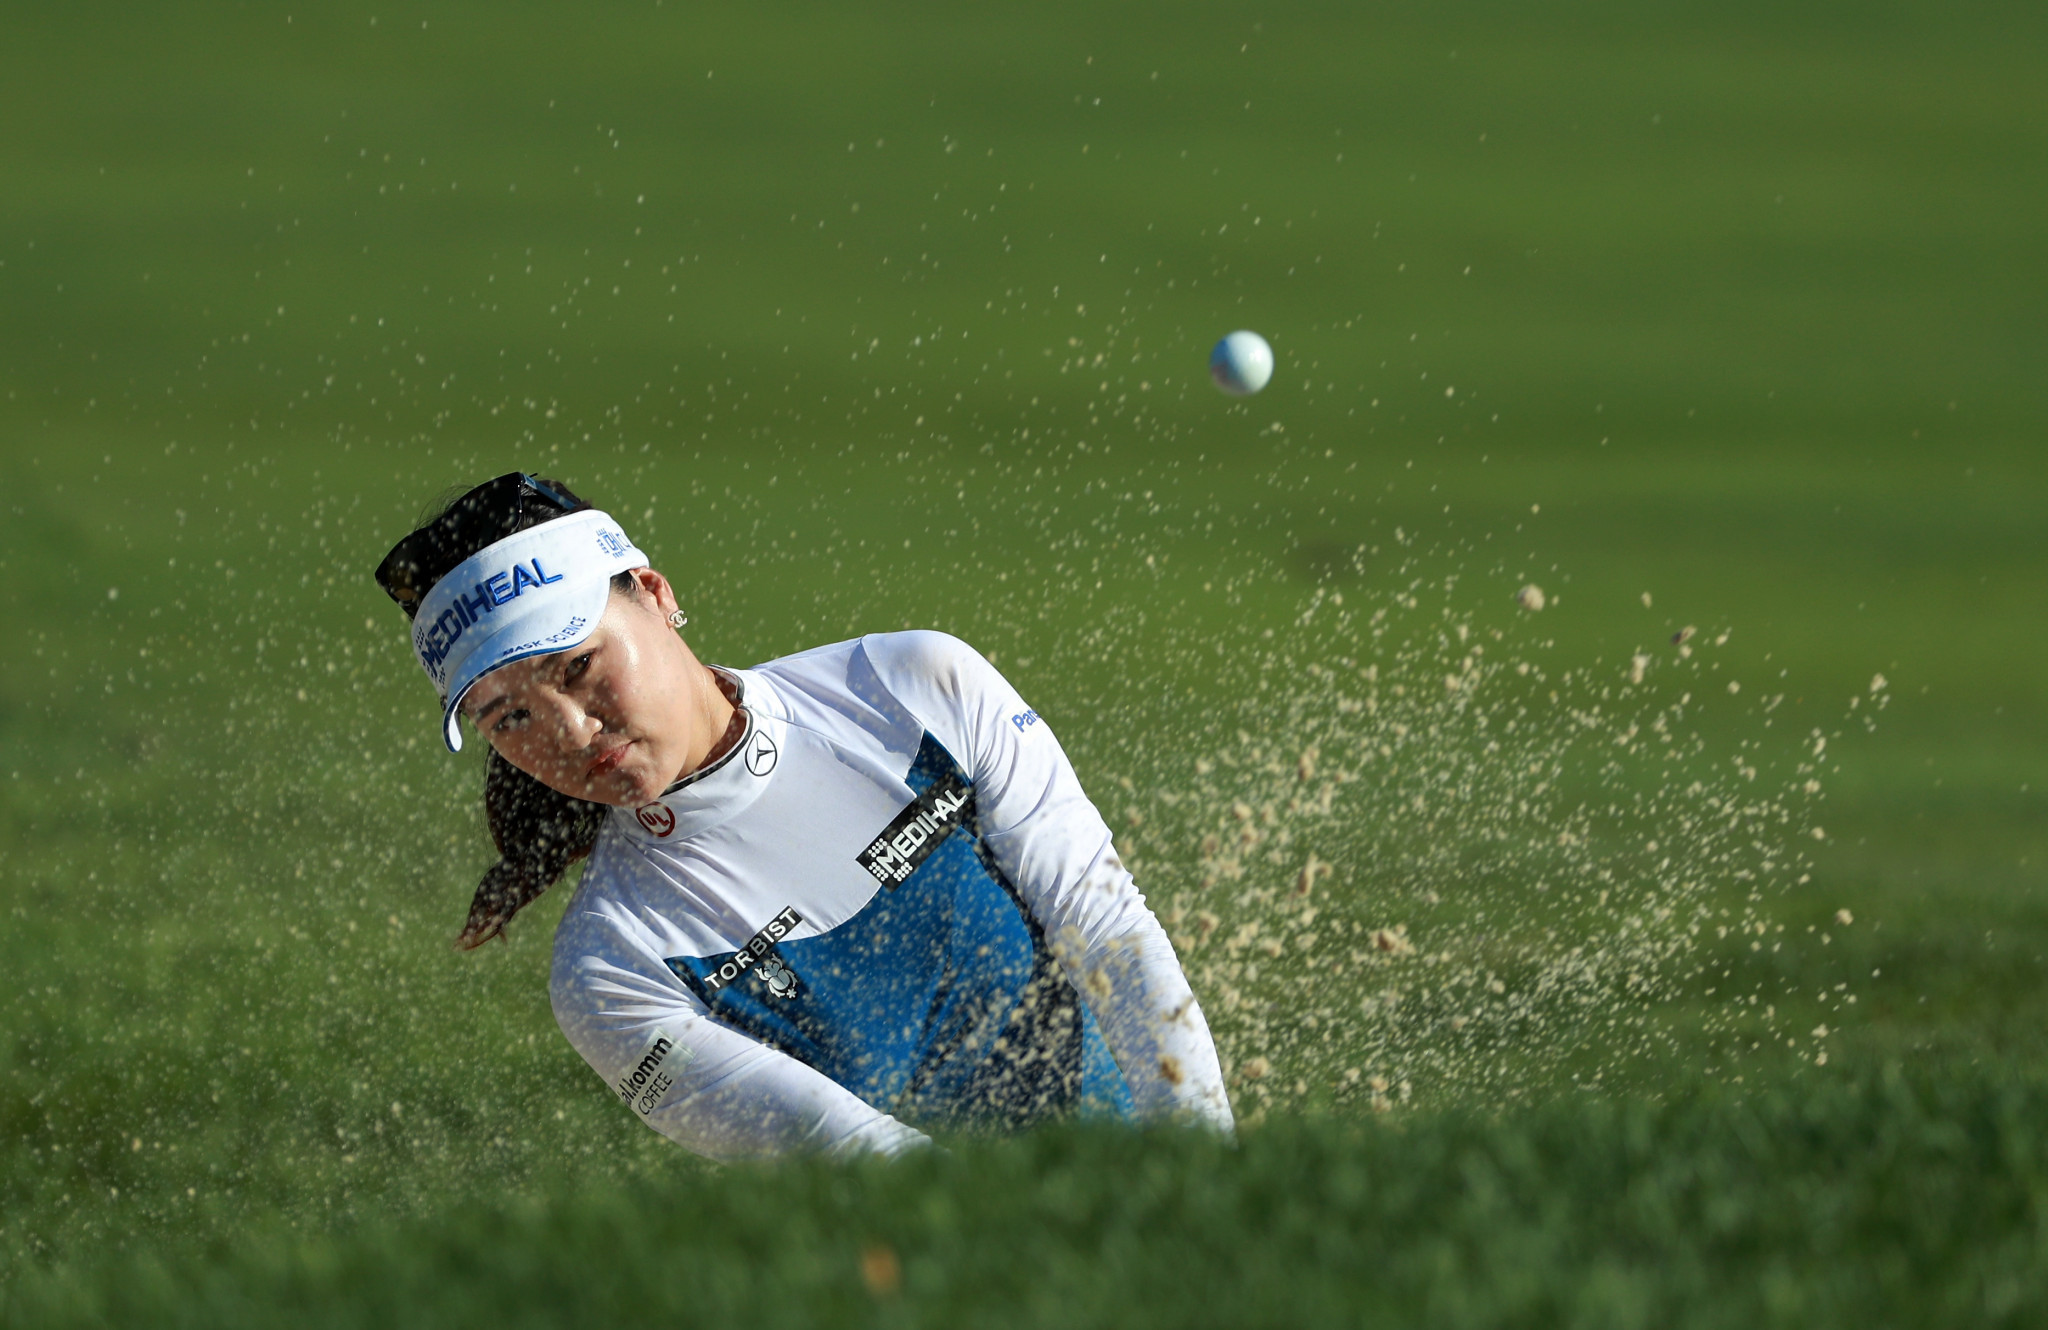 South Korea's Ryu So-yeon is tied for the lead on six-under par after day two of the Women's PGA Championship in Chicago ©Getty Images